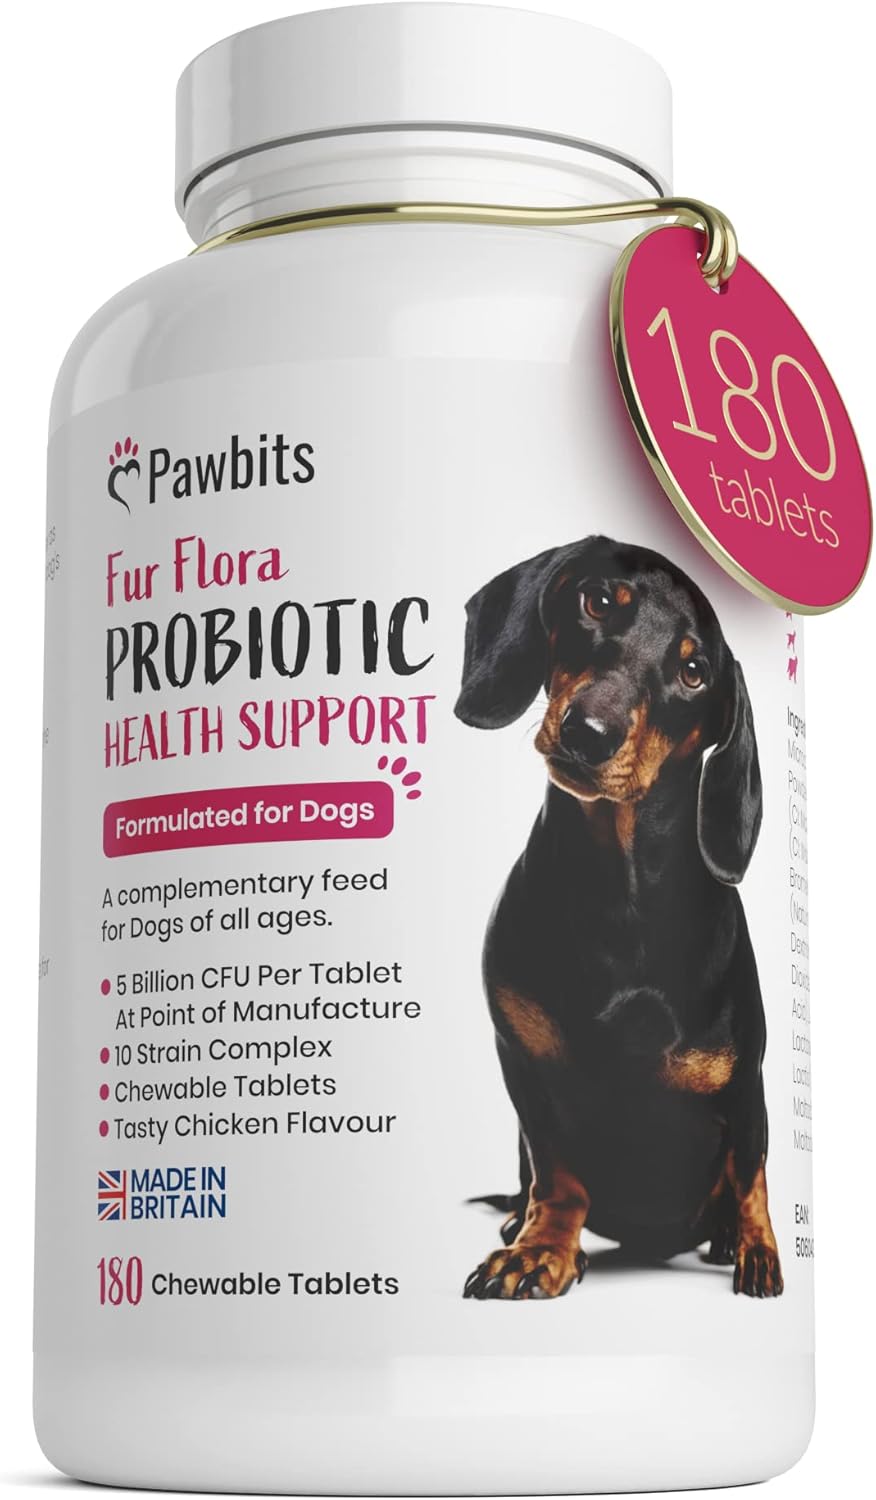 180 Canine Probiotics & Prebiotics Tablets for Dogs – 5 Billion CFU Tablet Chicken Flavour Chewable Dietary Supplements -10 Strain Complex for Digestive Support, Gut Health, Bad Breath & Itchy Skin?5060435209893